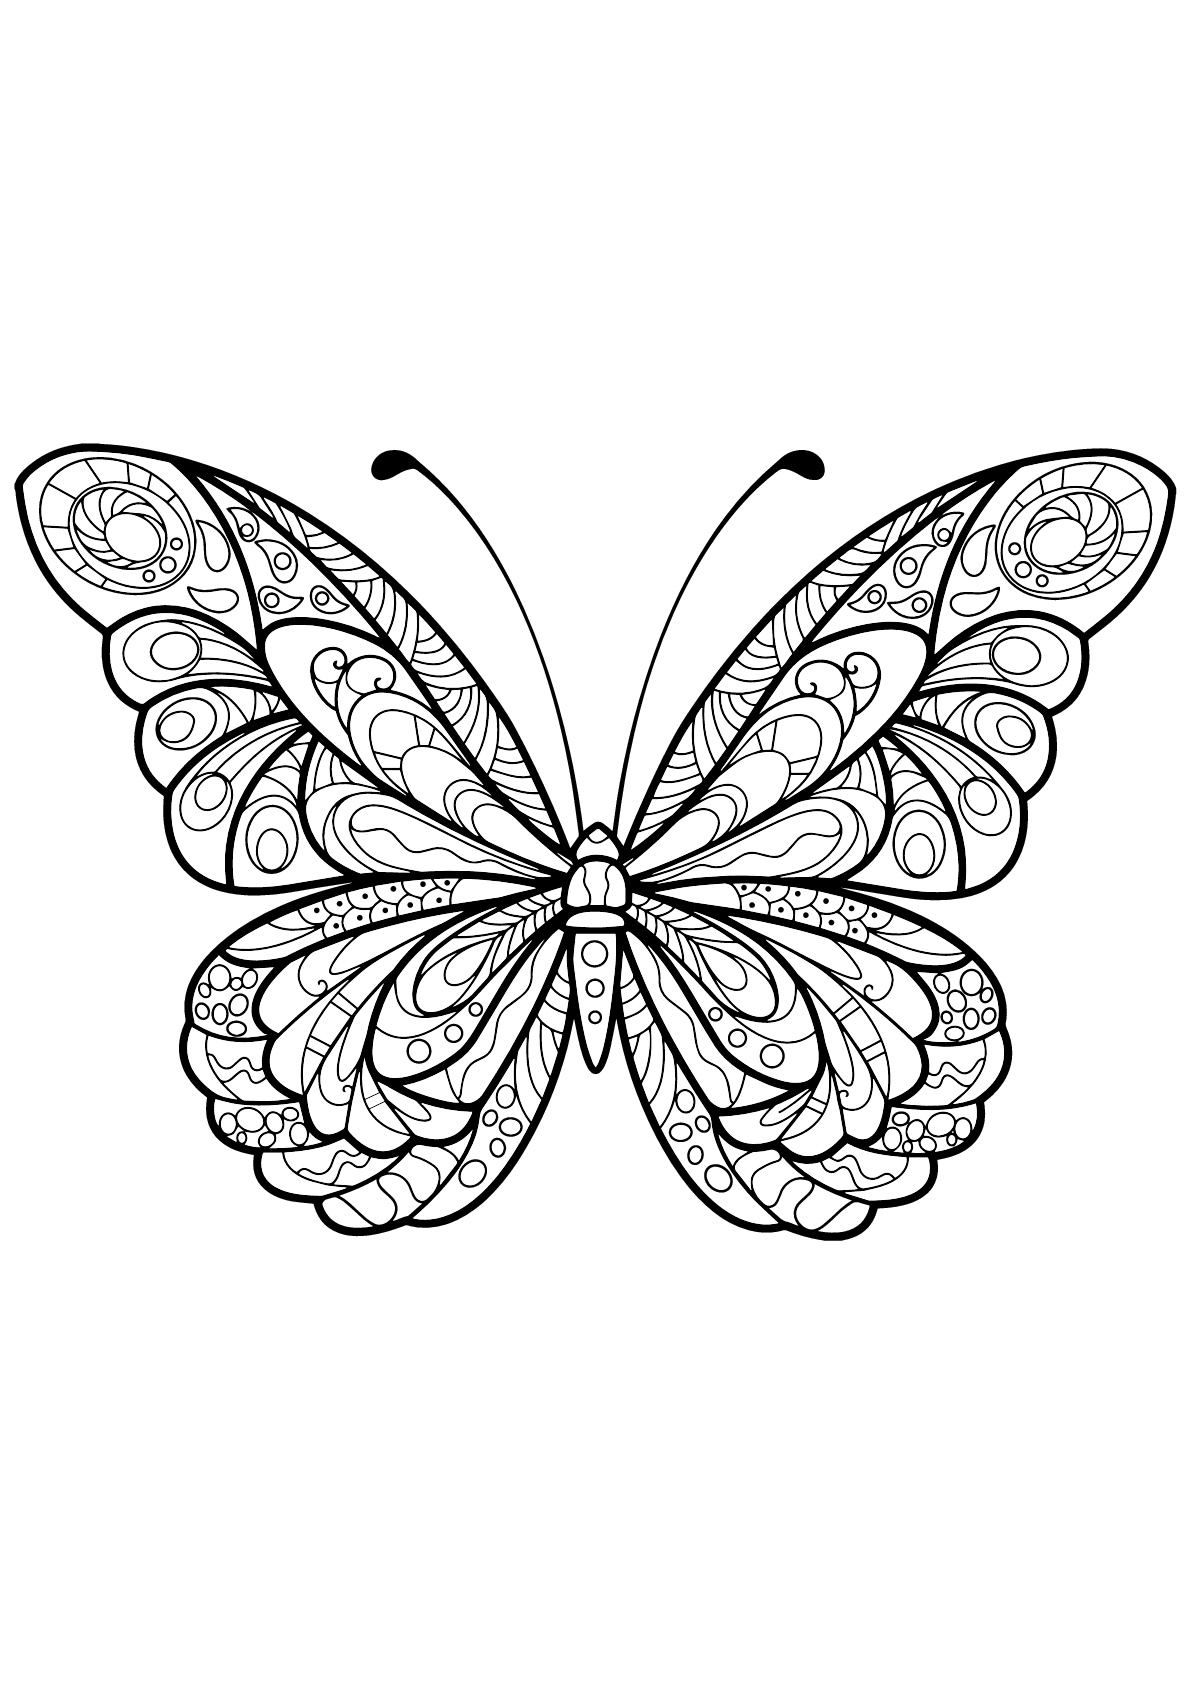 Butterfly Coloring Pages For Adults : butterfly | Let's Doodle